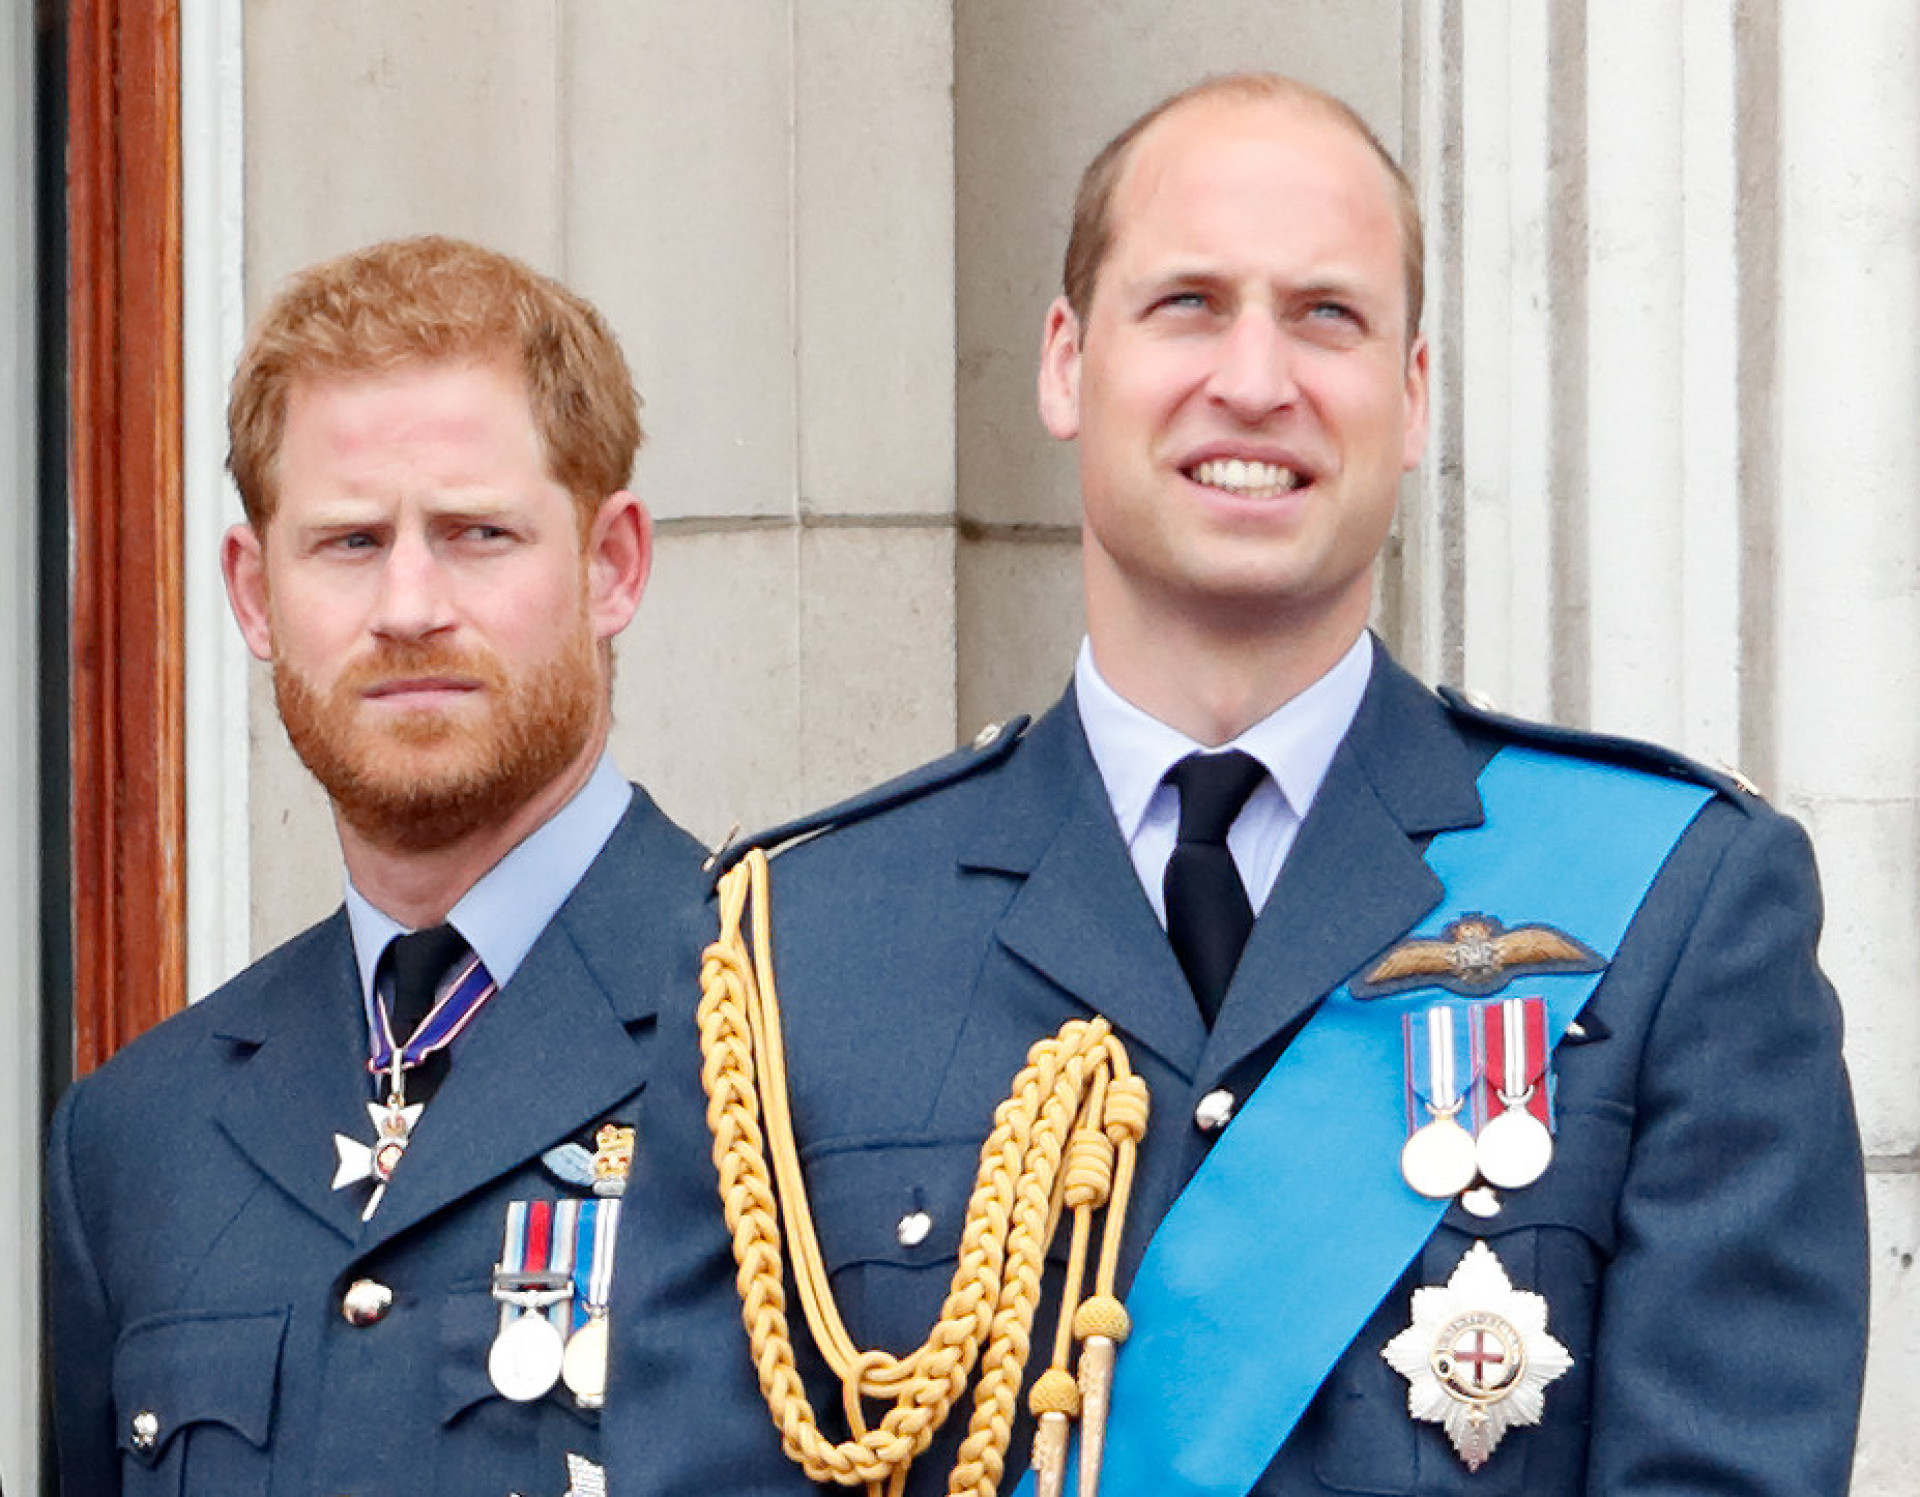 <p>Though Prince William is next in line, some analysts have claimed that the statement "no mark of a king" suggests Prince Harry will assume the throne!</p> <p>Sources: (Grunge) (New York Post) </p> <p>See also: <a href="https://www.starsinsider.com/lifestyle/542512/the-truth-about-nostradamus">The truth about Nostradamus</a></p><p><a href="https://www.msn.com/en-us/community/channel/vid-7xx8mnucu55yw63we9va2gwr7uihbxwc68fxqp25x6tg4ftibpra?cvid=94631541bc0f4f89bfd59158d696ad7e">Follow us and access great exclusive content every day</a></p>